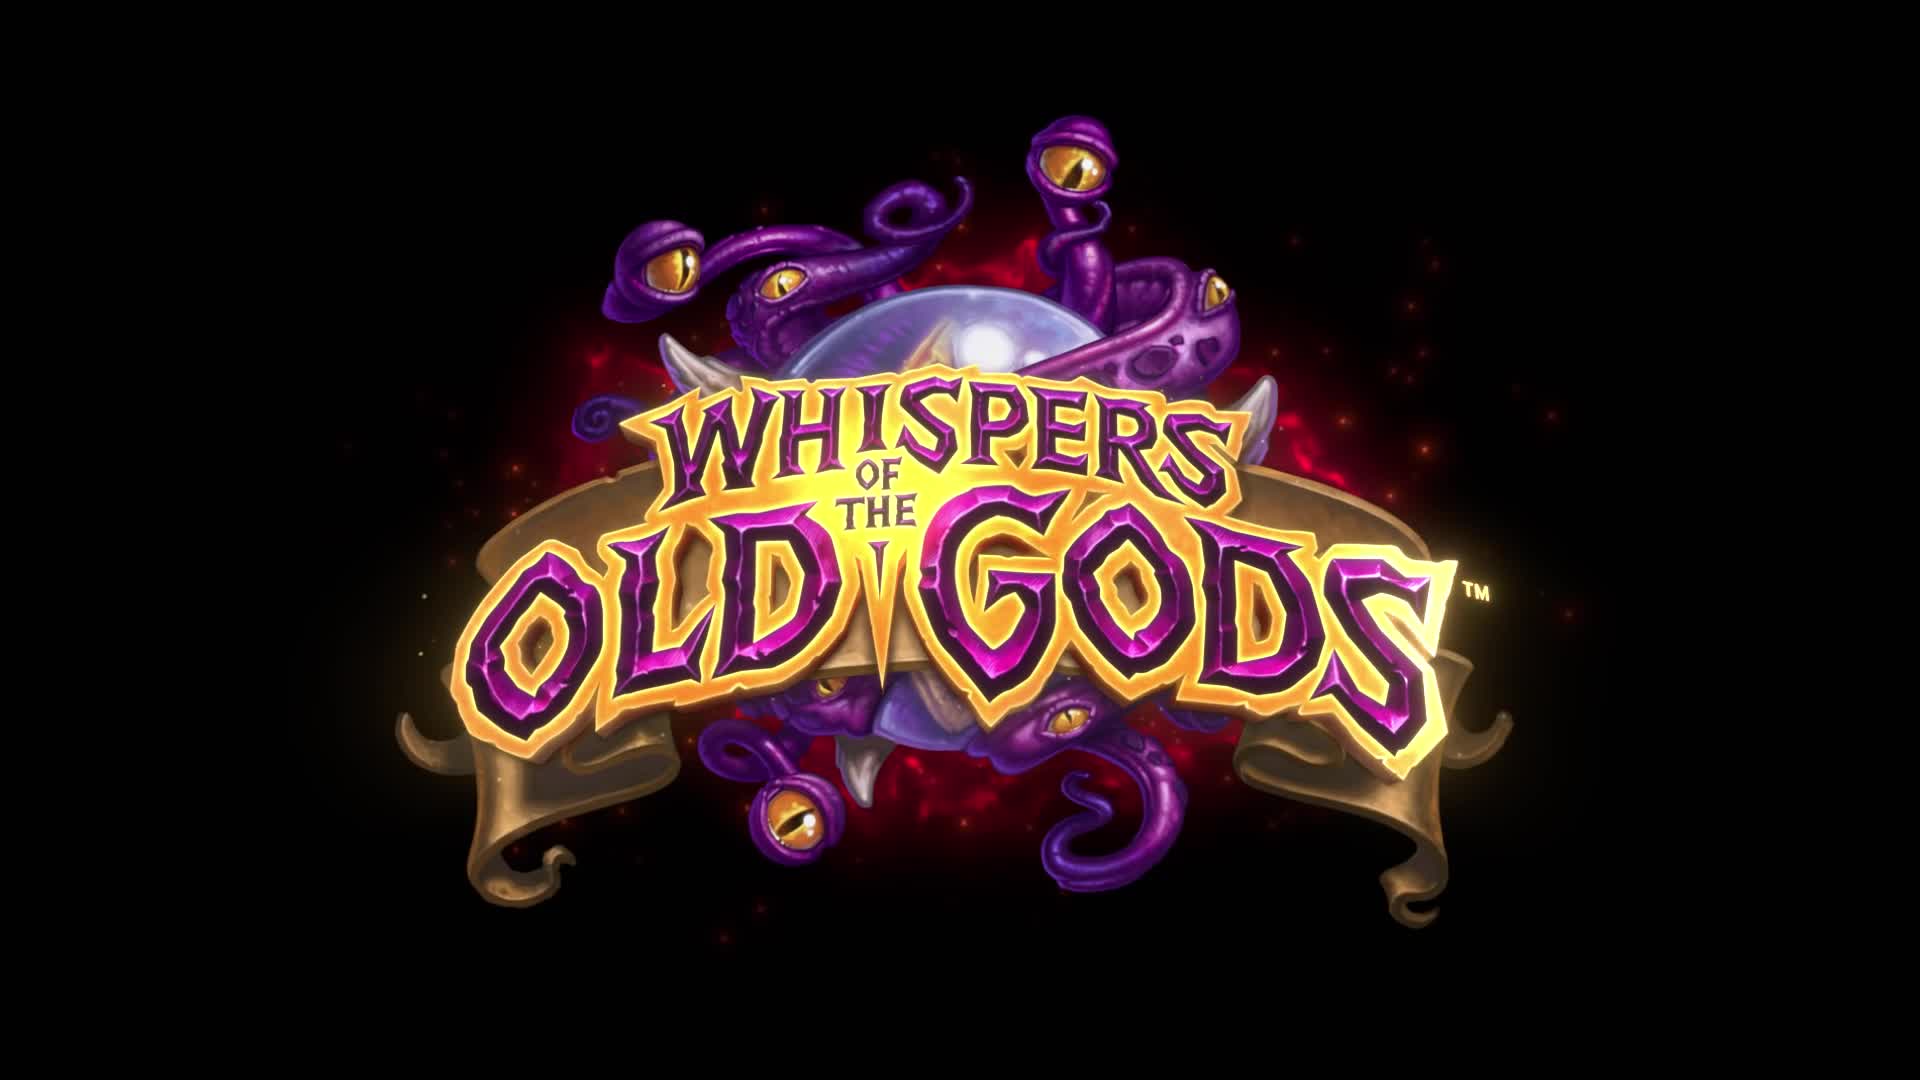 Hearthstone: Whispers of the Old Gods cinematic trailer